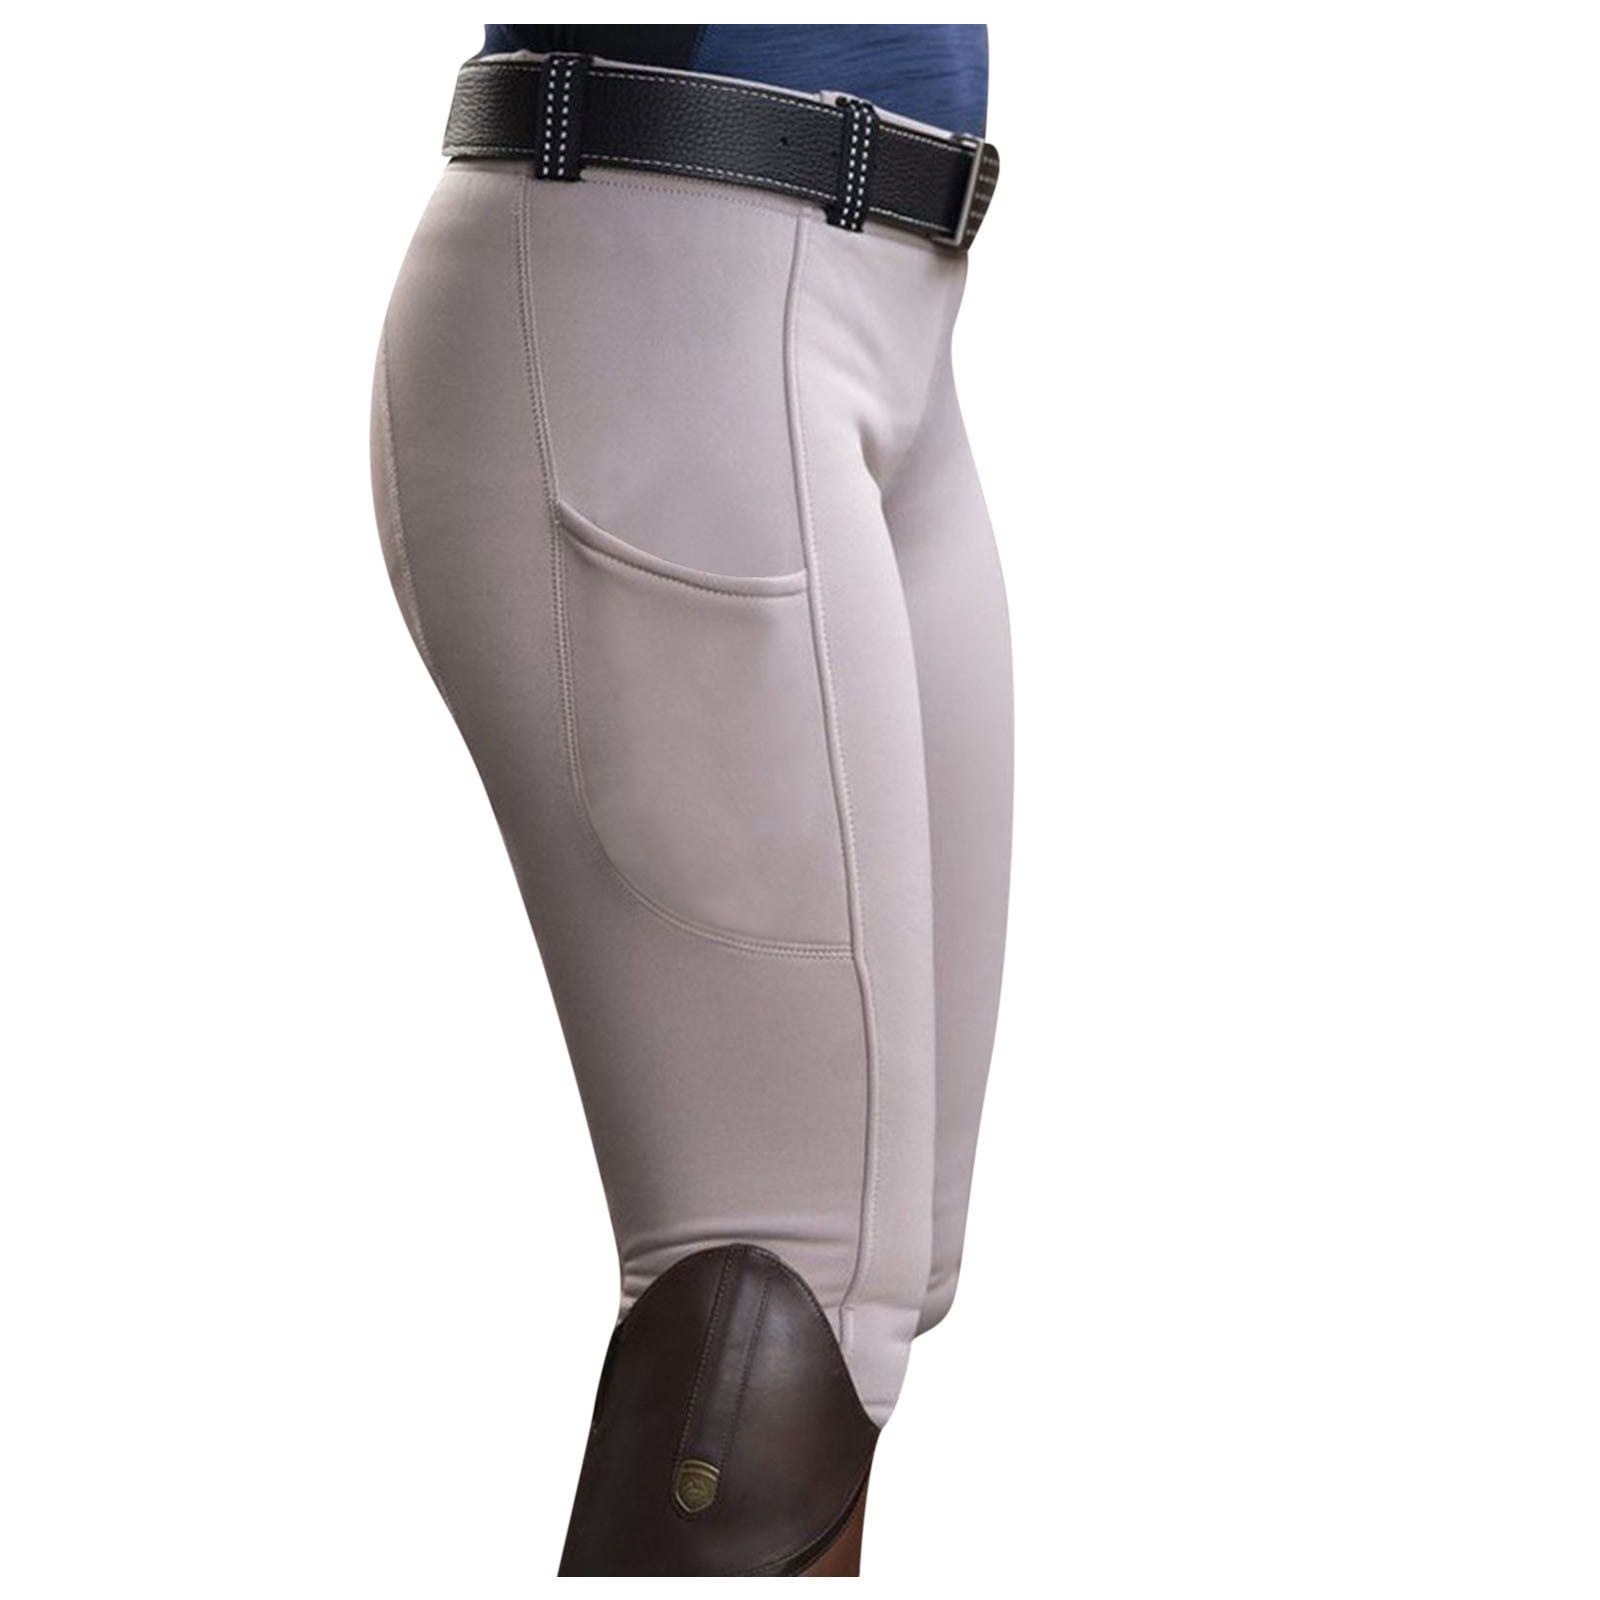 Women Horse Riding Tights Pockets,Women Training Breeches Pants with Silicone Grip 